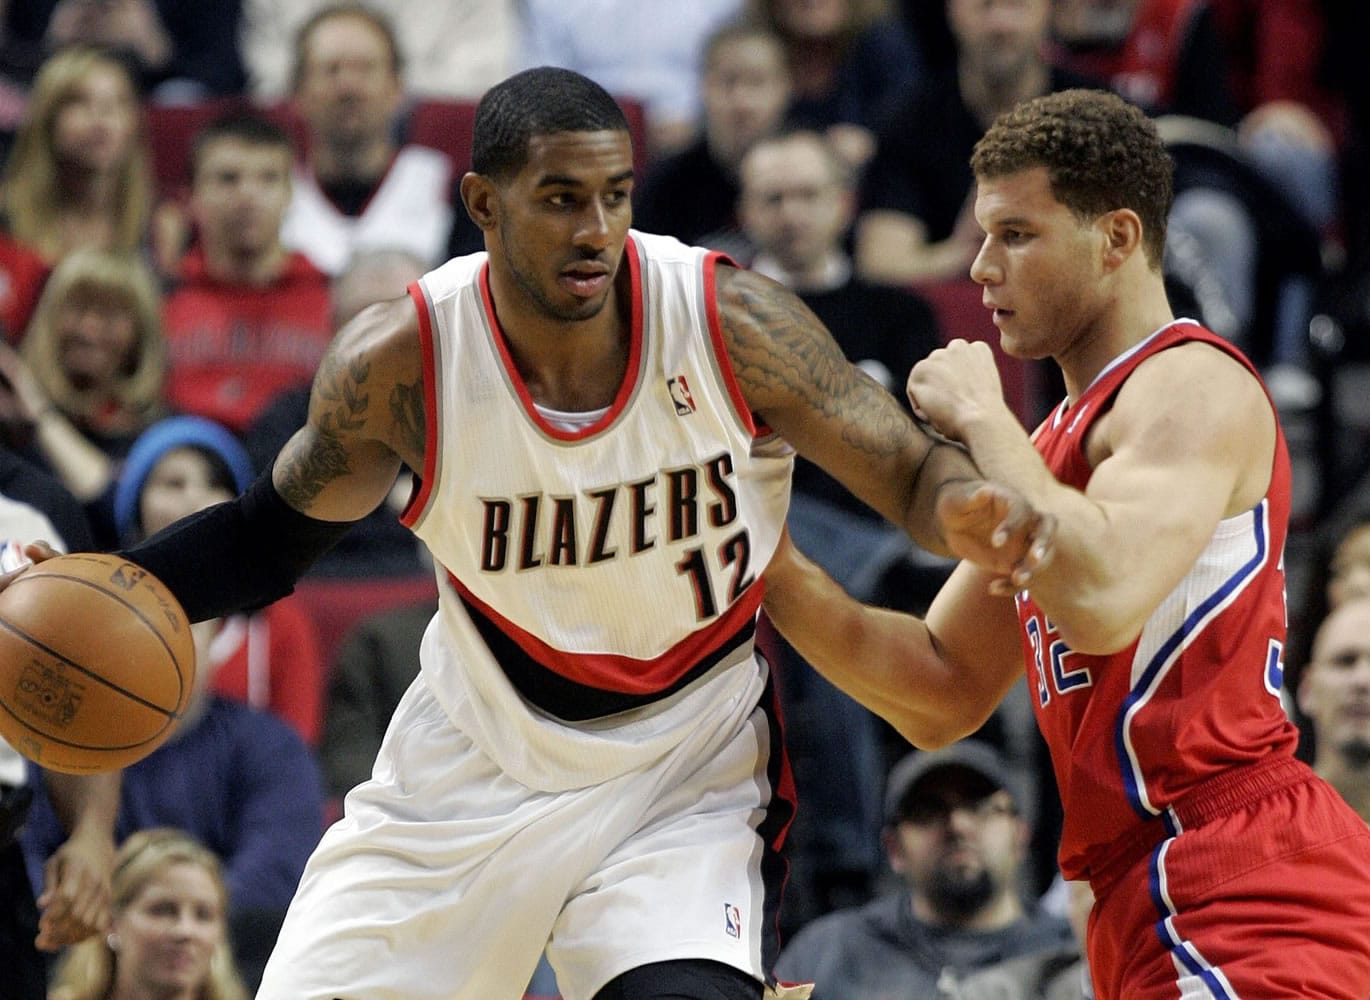 Portland Trail Blazers forward LaMarcus Aldridge, left, tries to move to the basket against Los Angeles Clippers forward Blake Griffin during the first quarter of their NBA basketball game in Portland, Ore., Tuesday, Jan.